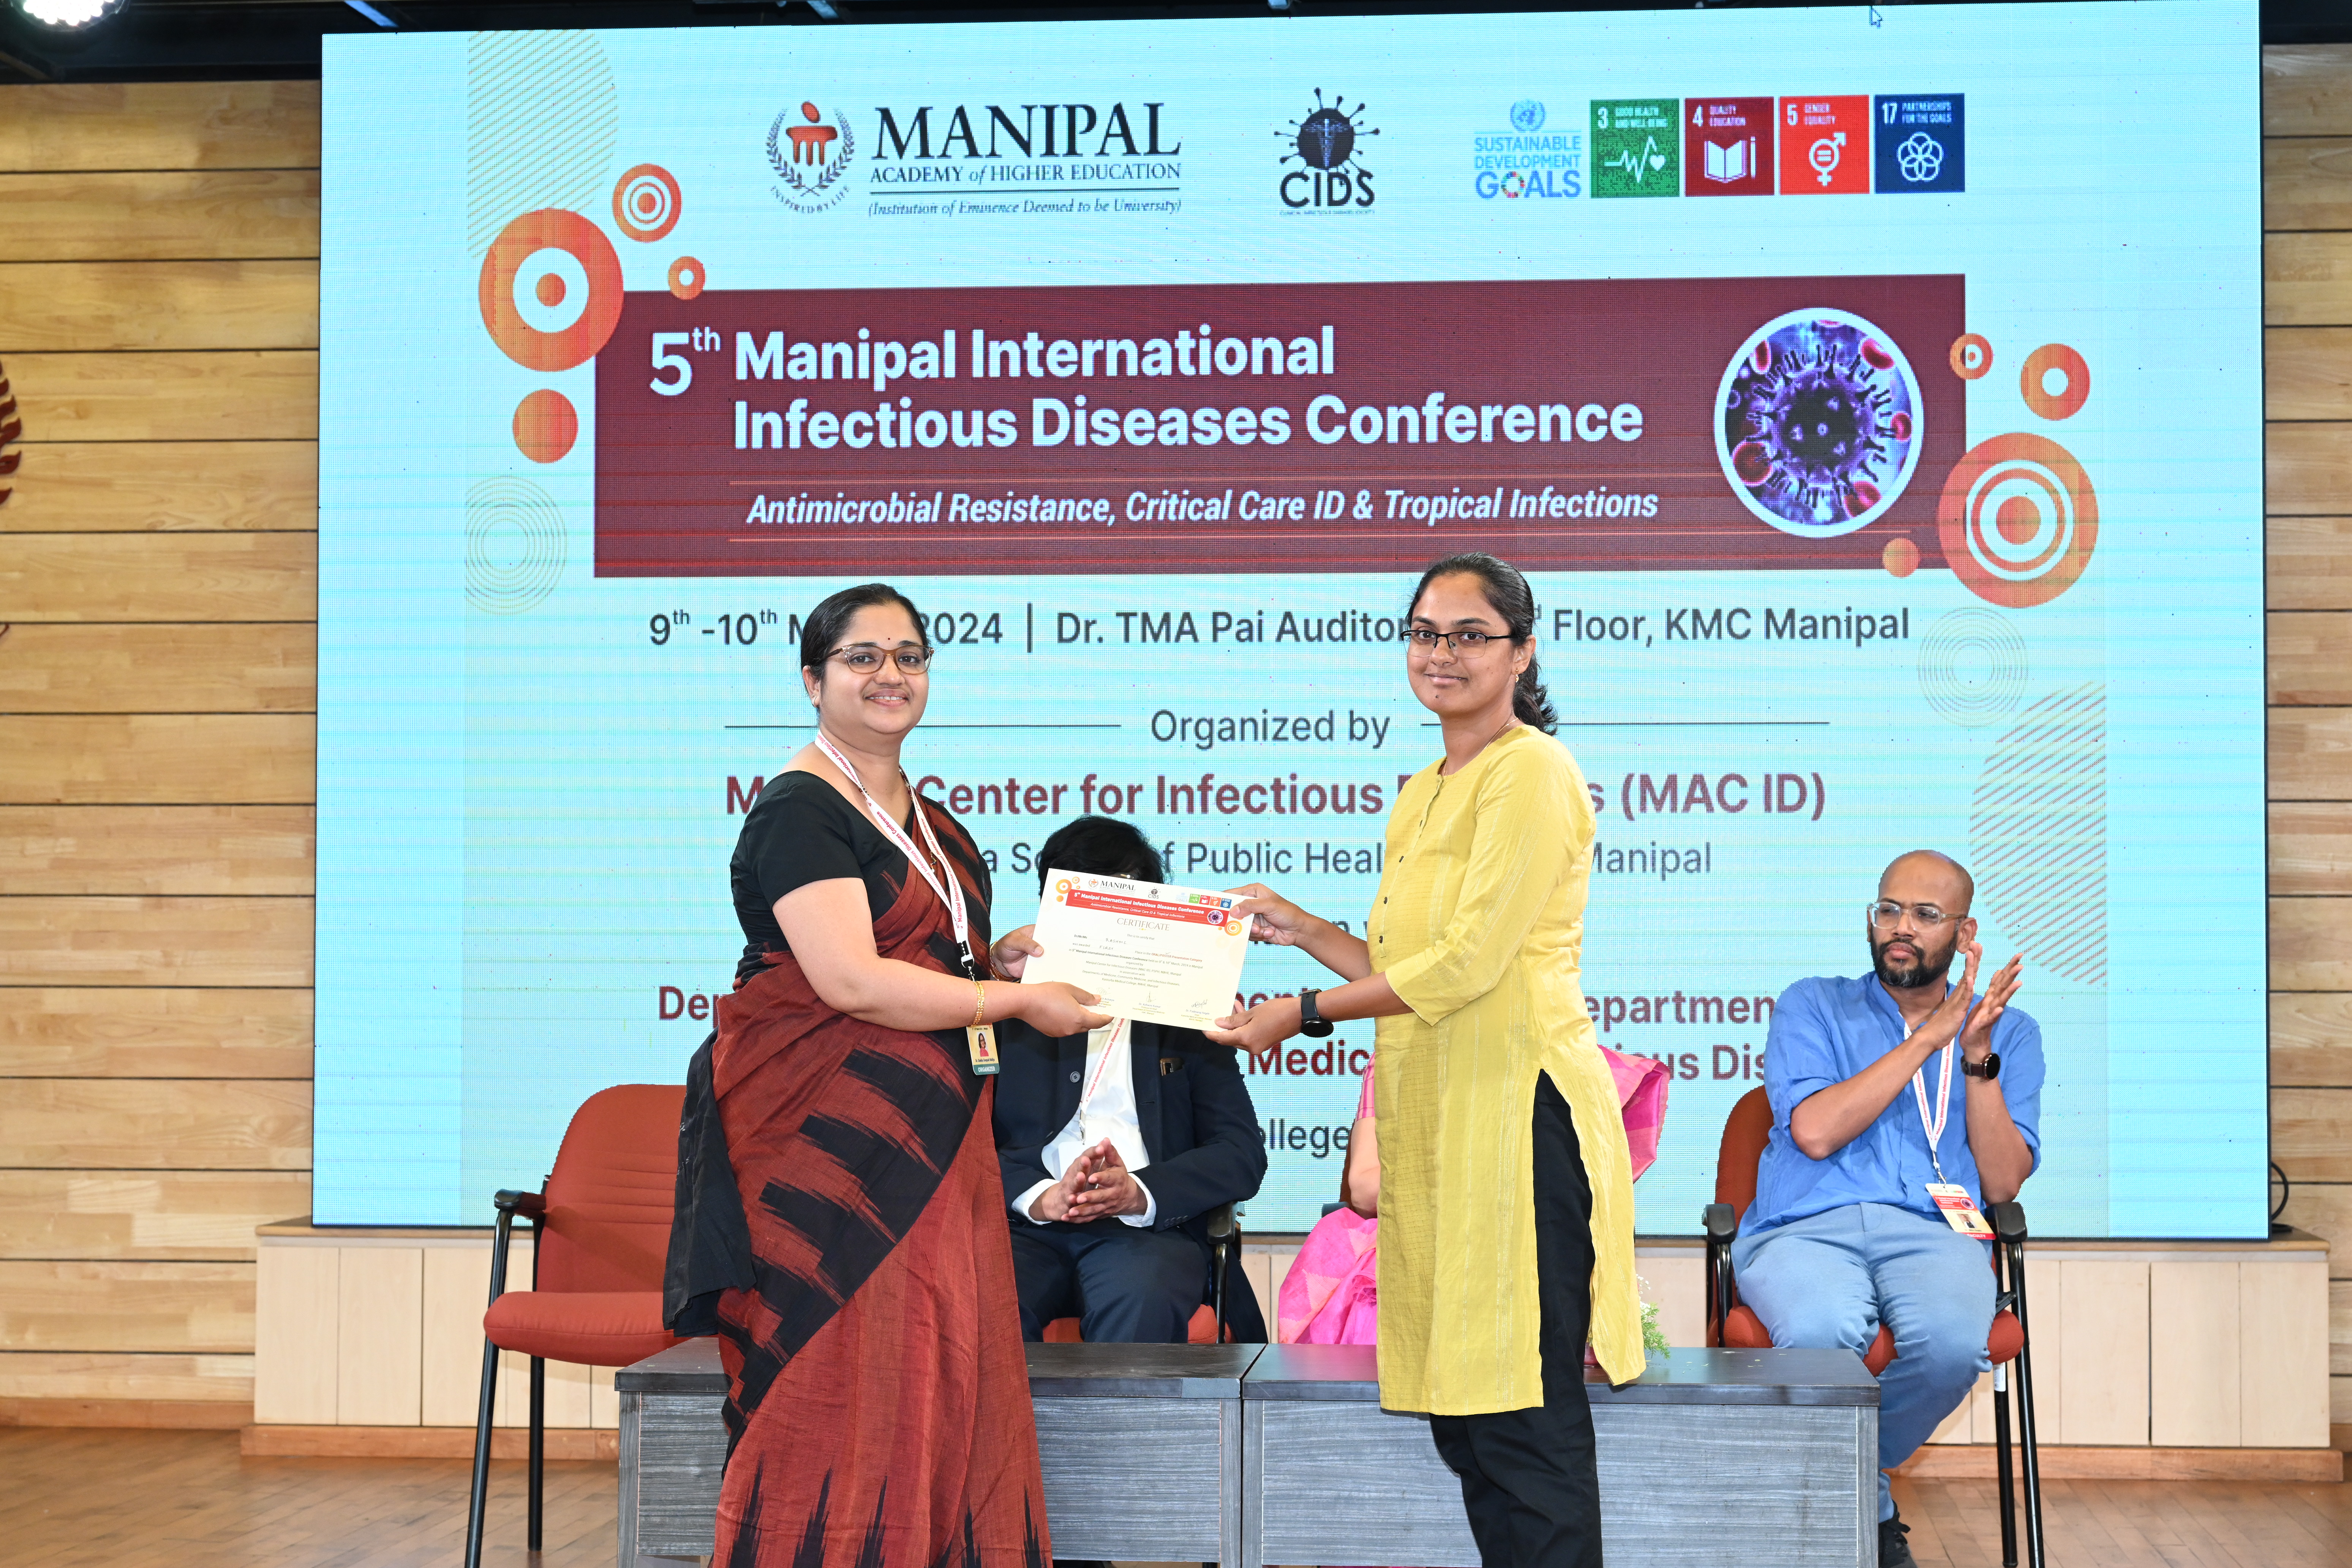 Best Poster Award at the Fifth Manipal International Infectious Diseases Conference: March 09-10, 2024